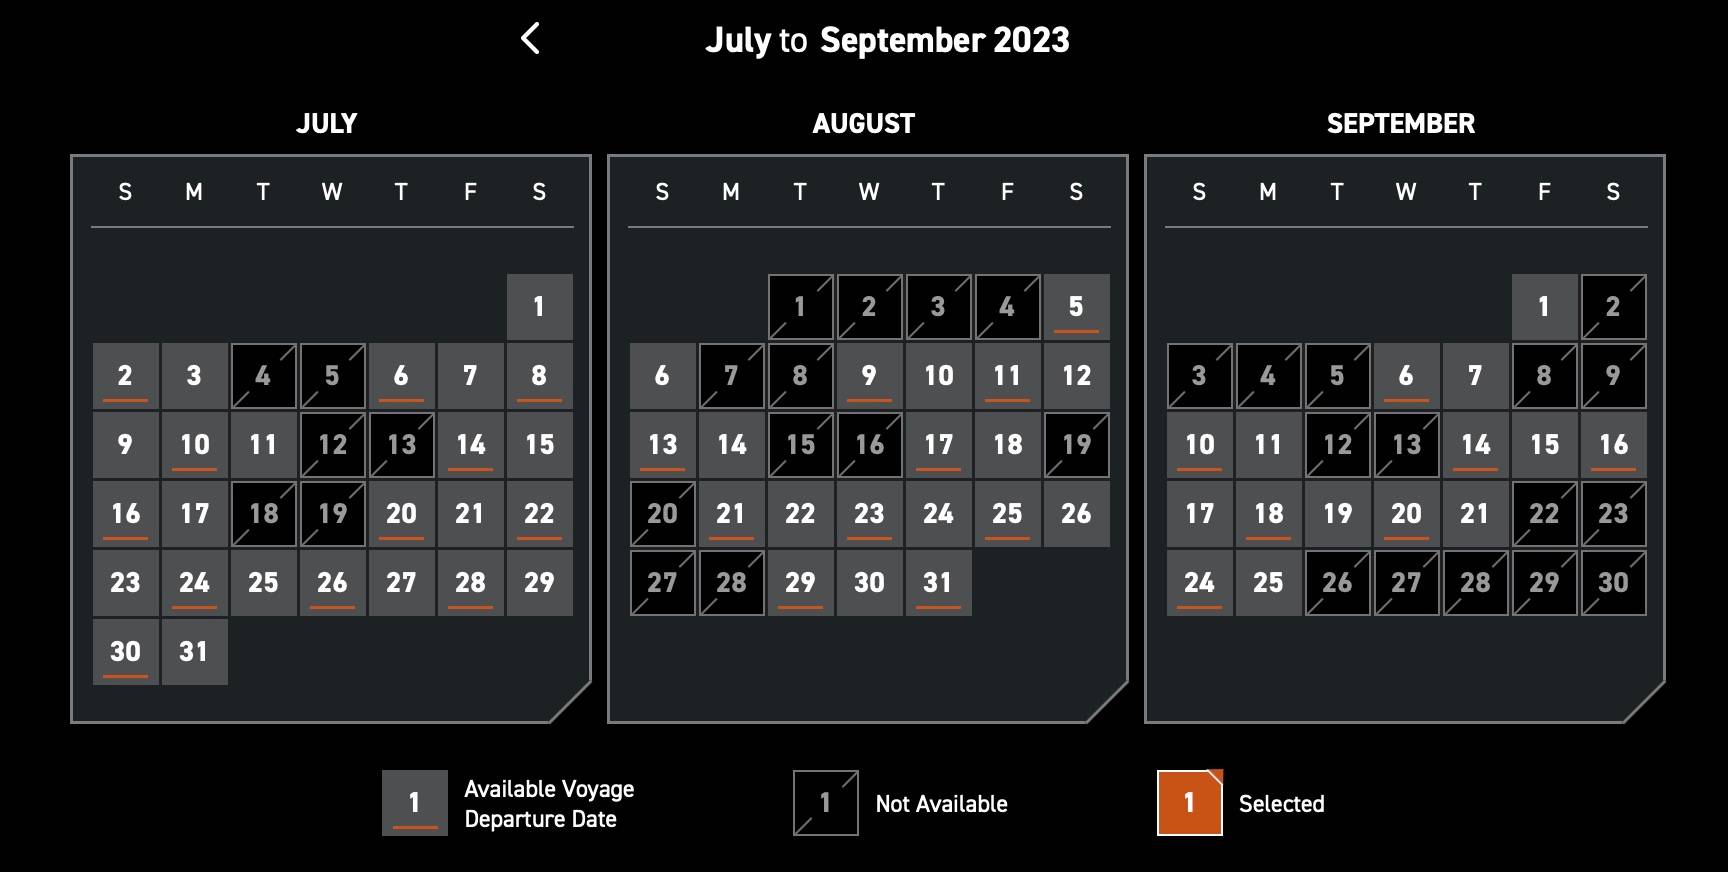 Star Wars Galactic Starcruiser August - September 2023 availability calendar and pricing